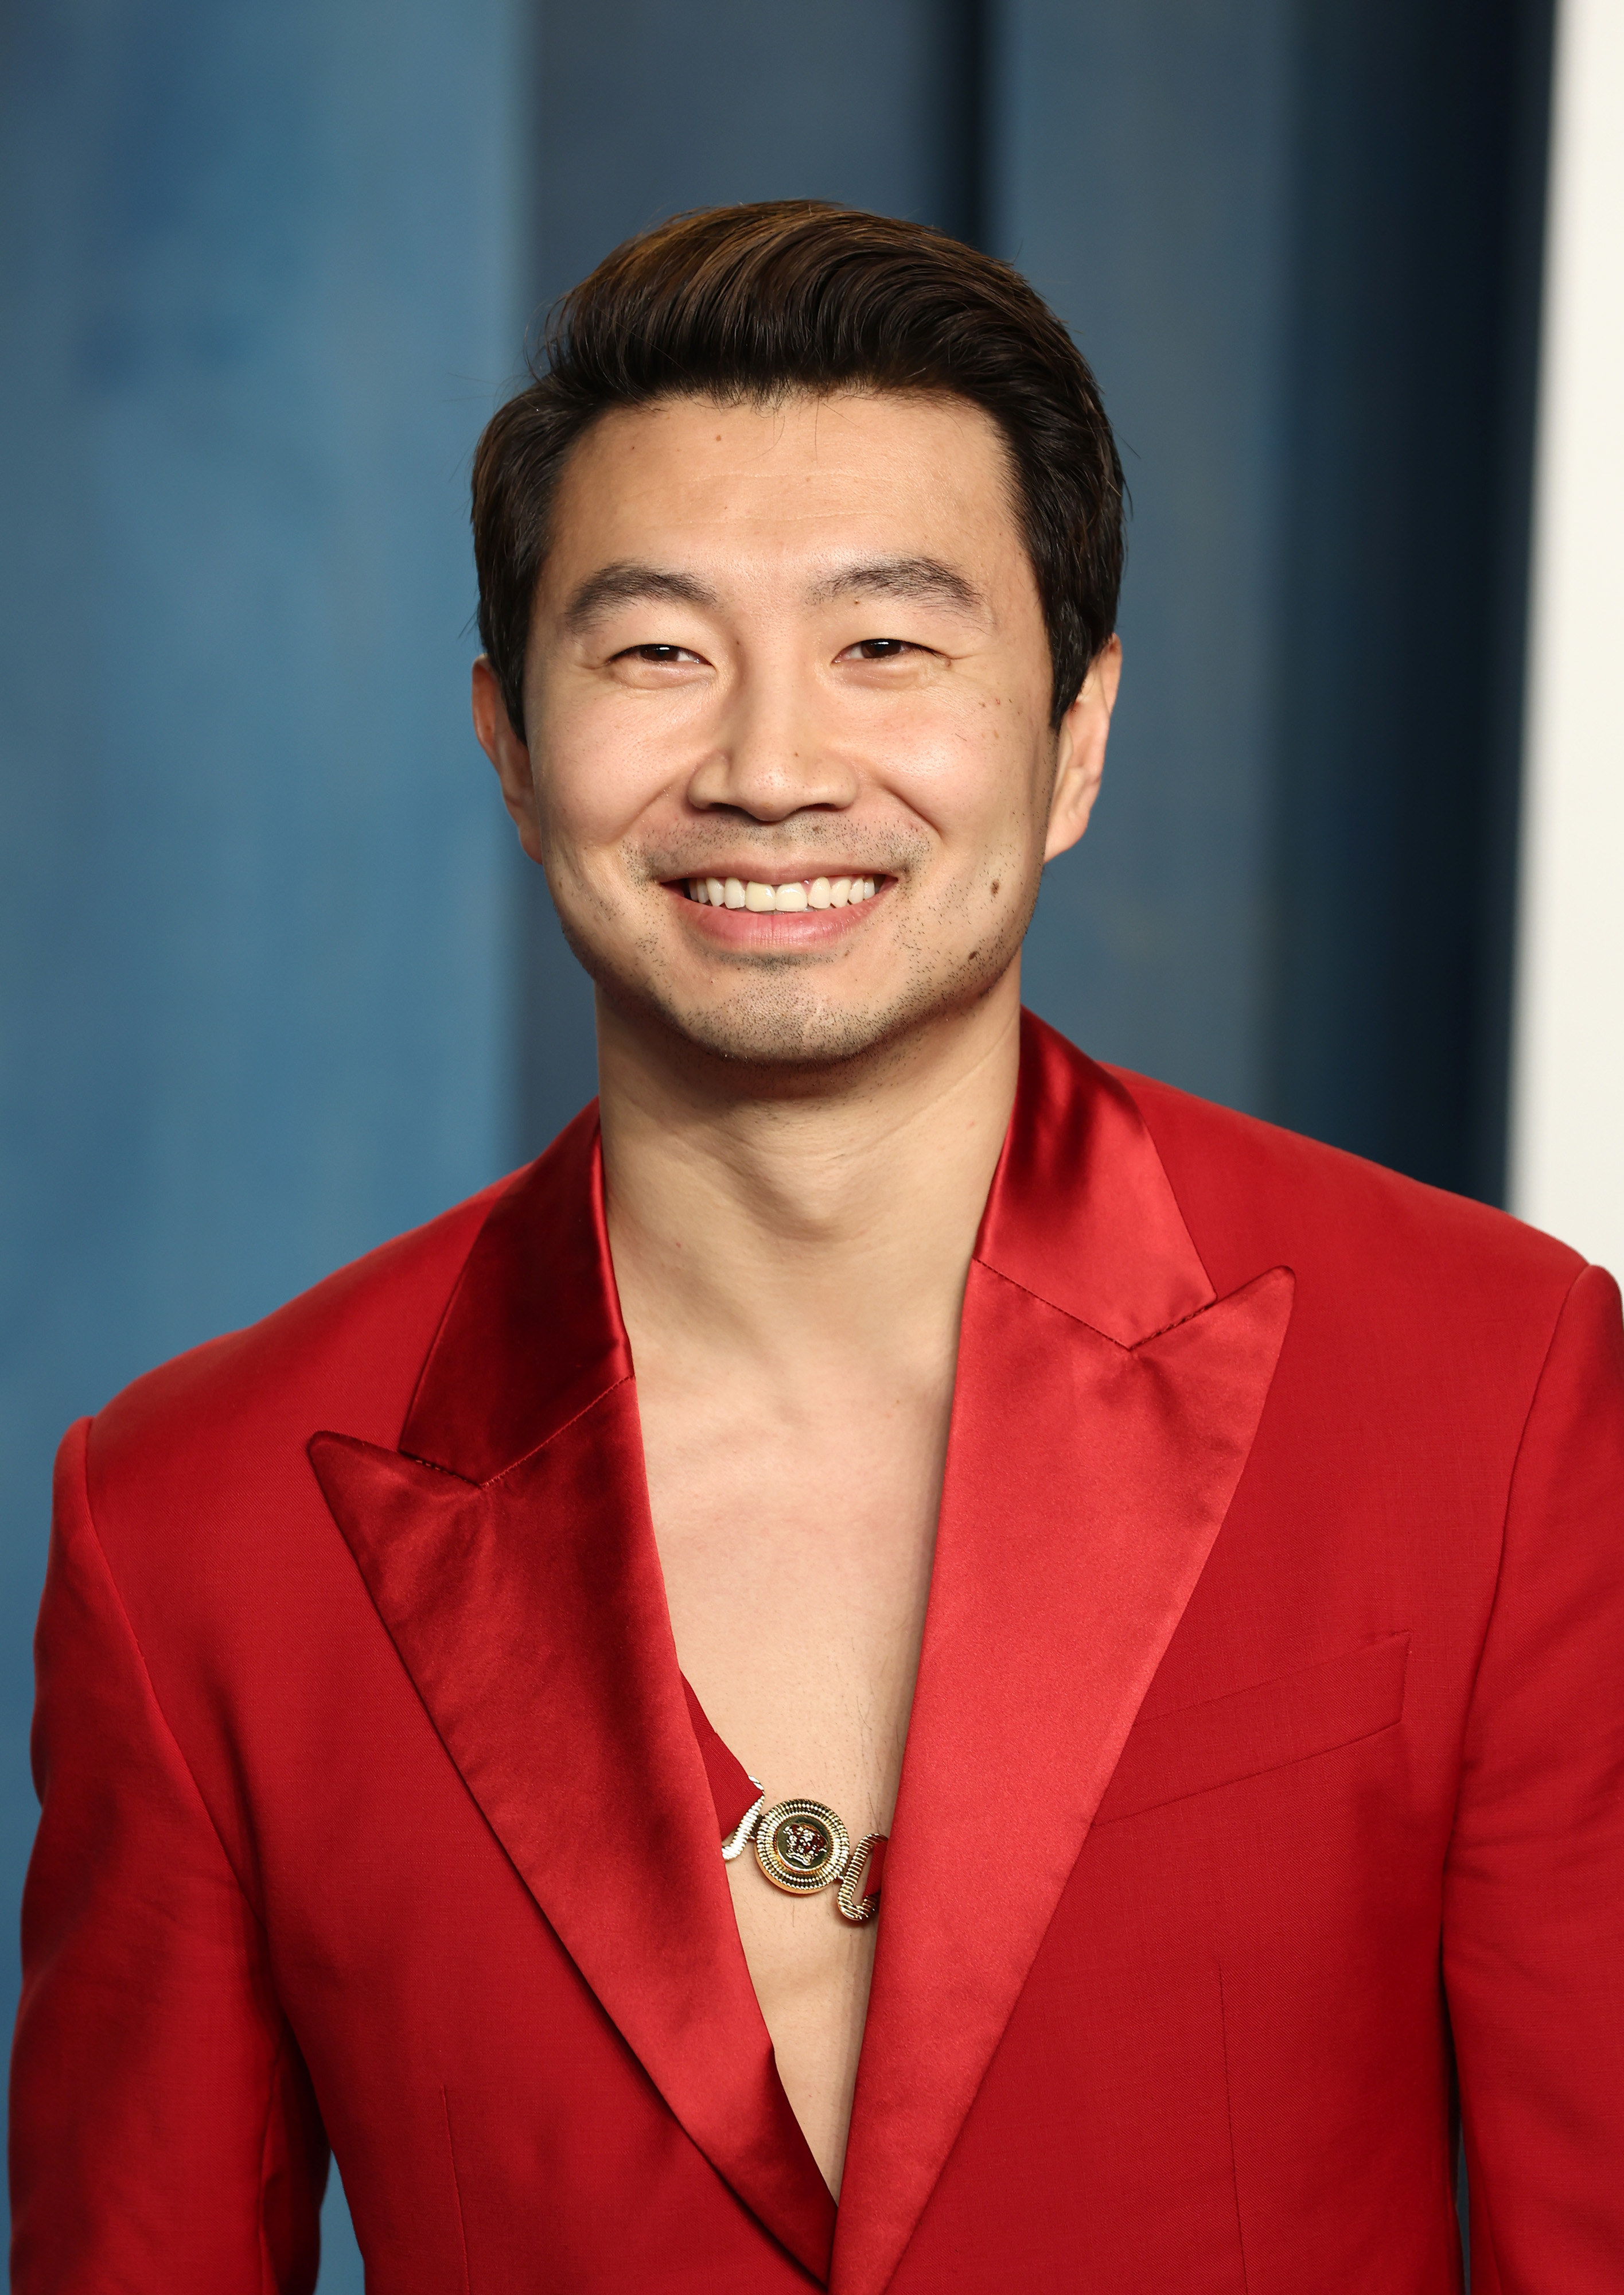 Simu Liu attends the 2022 Vanity Fair Oscar Party hosted by Radhika Jones at Wallis Annenberg Center for the Performing Arts on March 27, 2022 in Beverly Hills, California